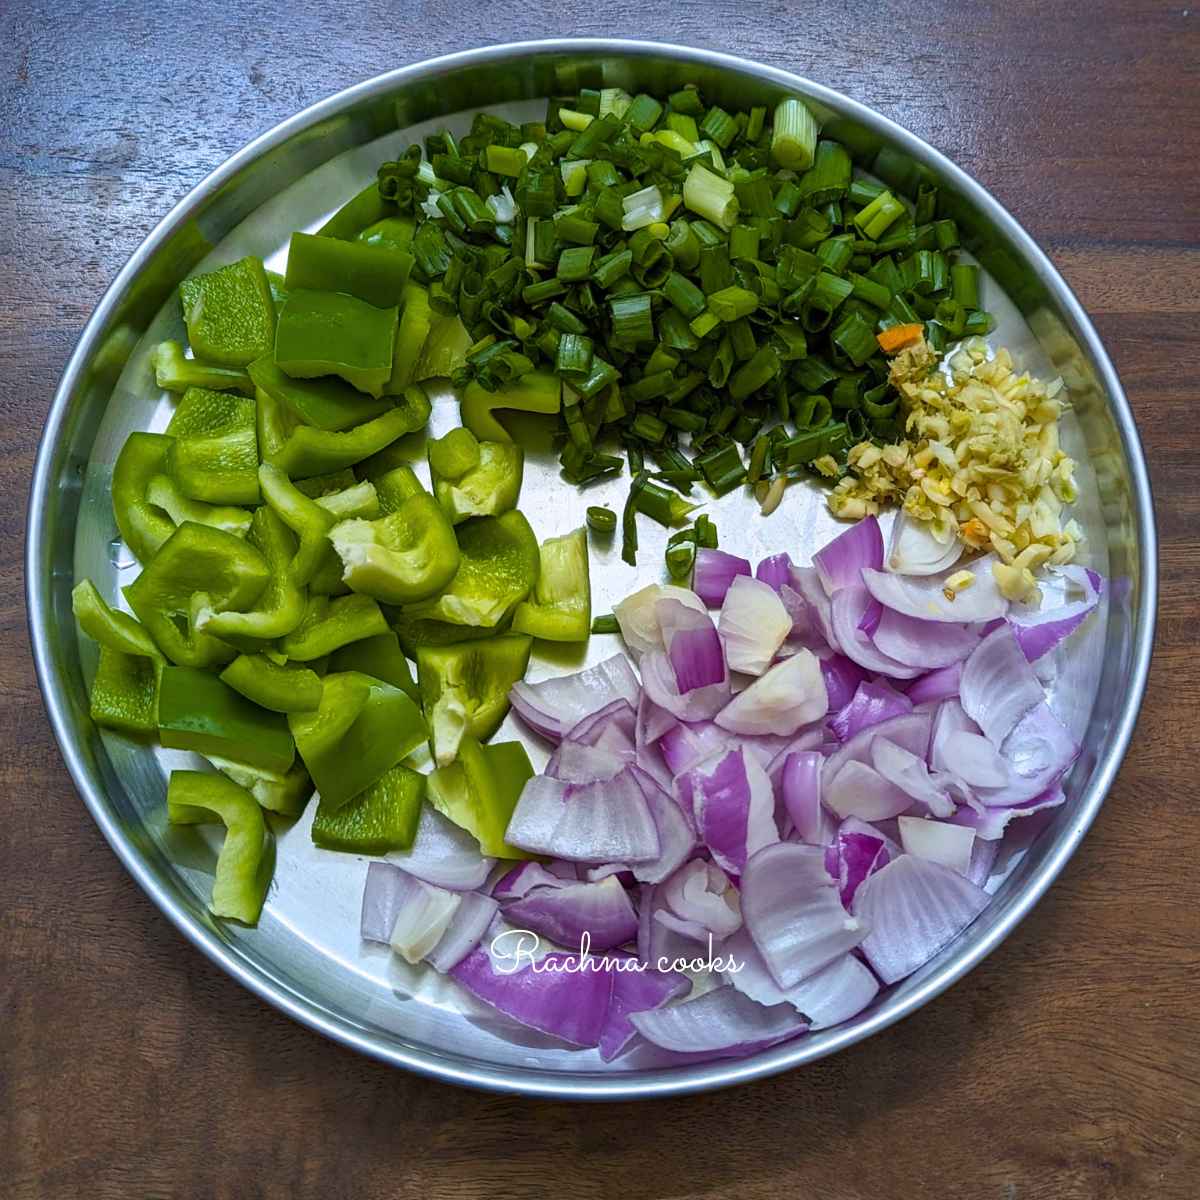 Onion, capsicum petals along with chopped spring onion, minced ginger and garlic.